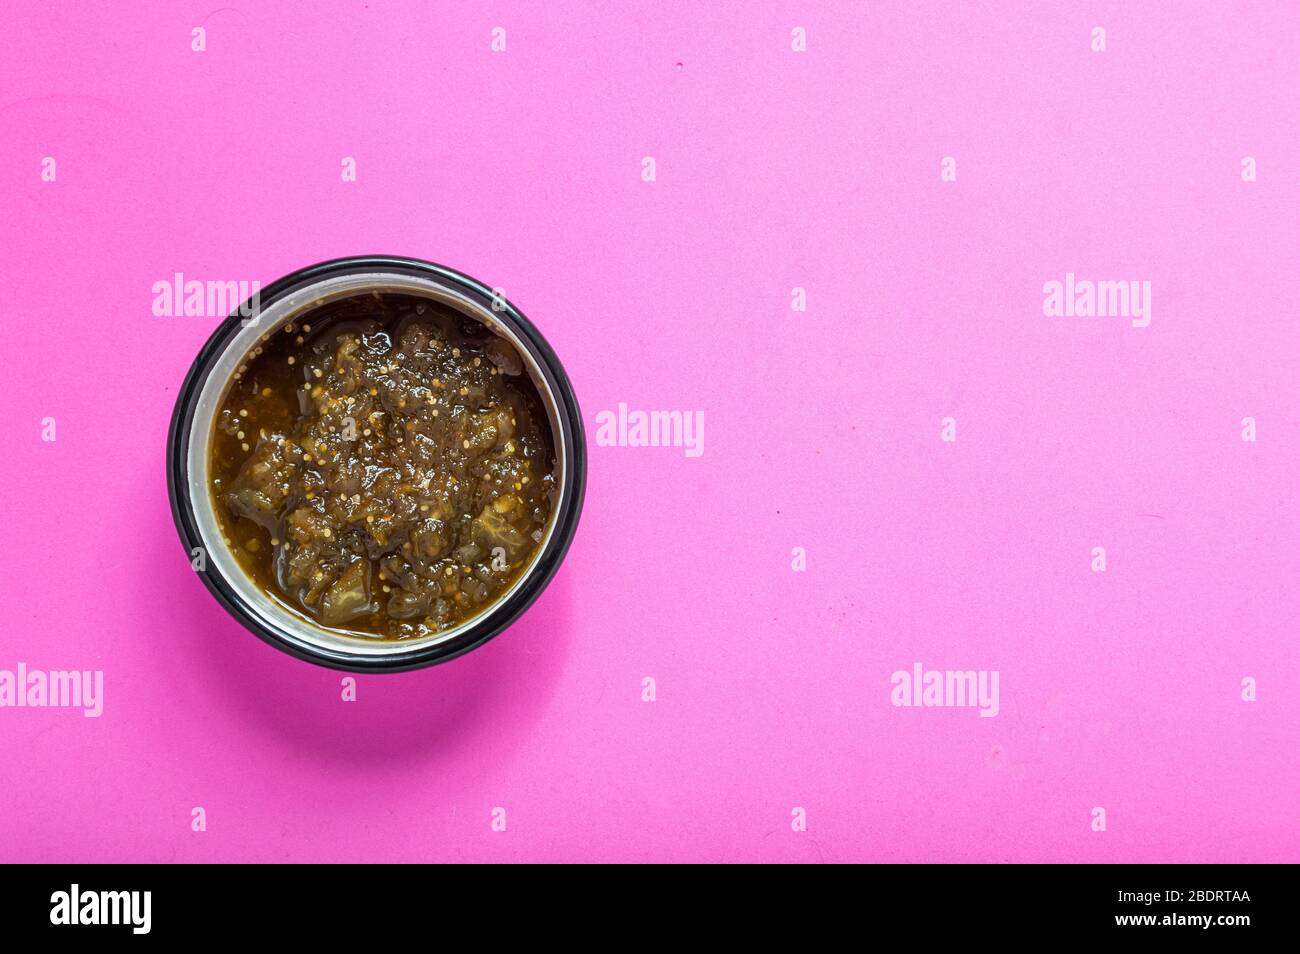 Cooked salsa verde on enamel bowl isolated on pink background. Mexican food, condiments. Stock Photo